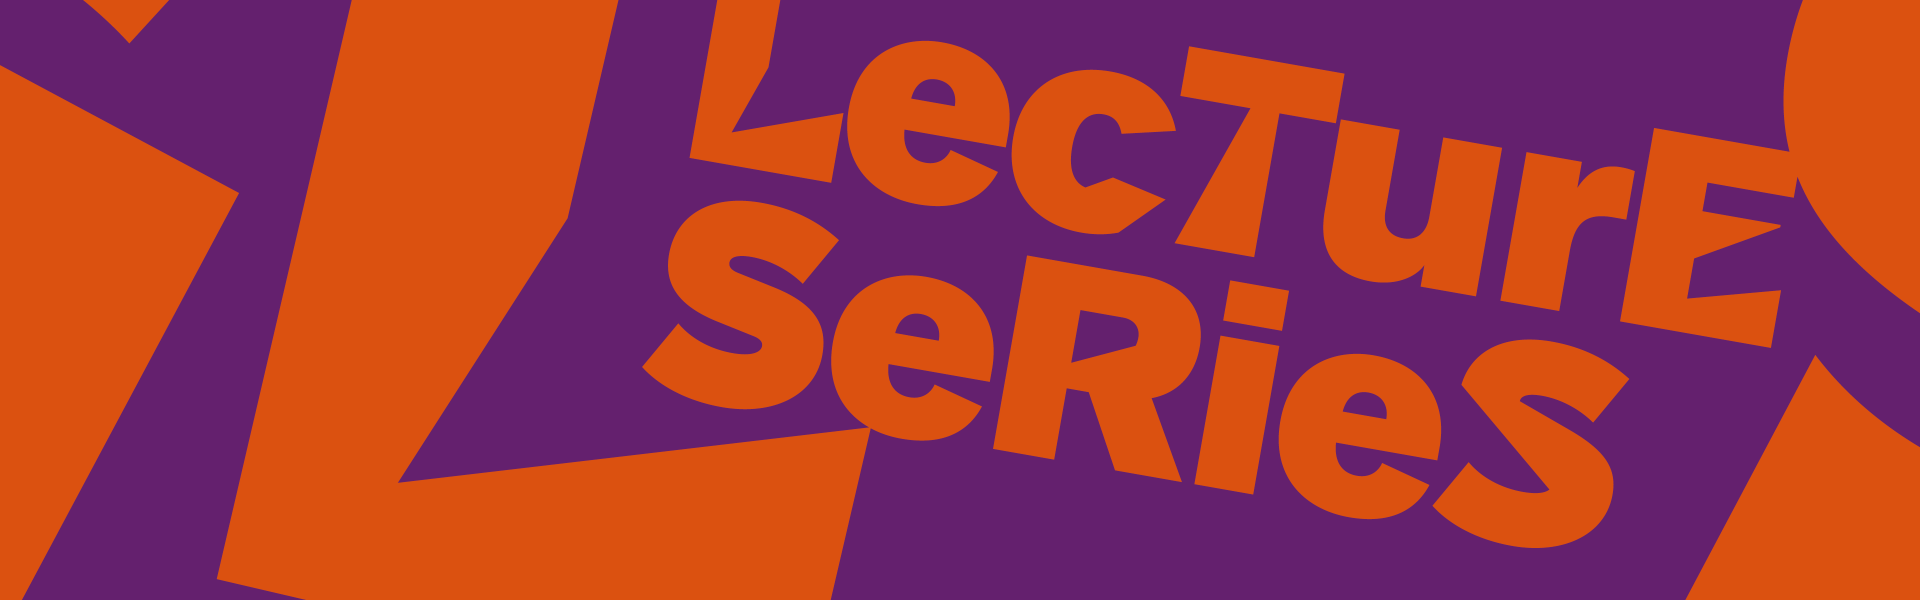 Graphic: The word Lecture Series in orange letters on a purple background.